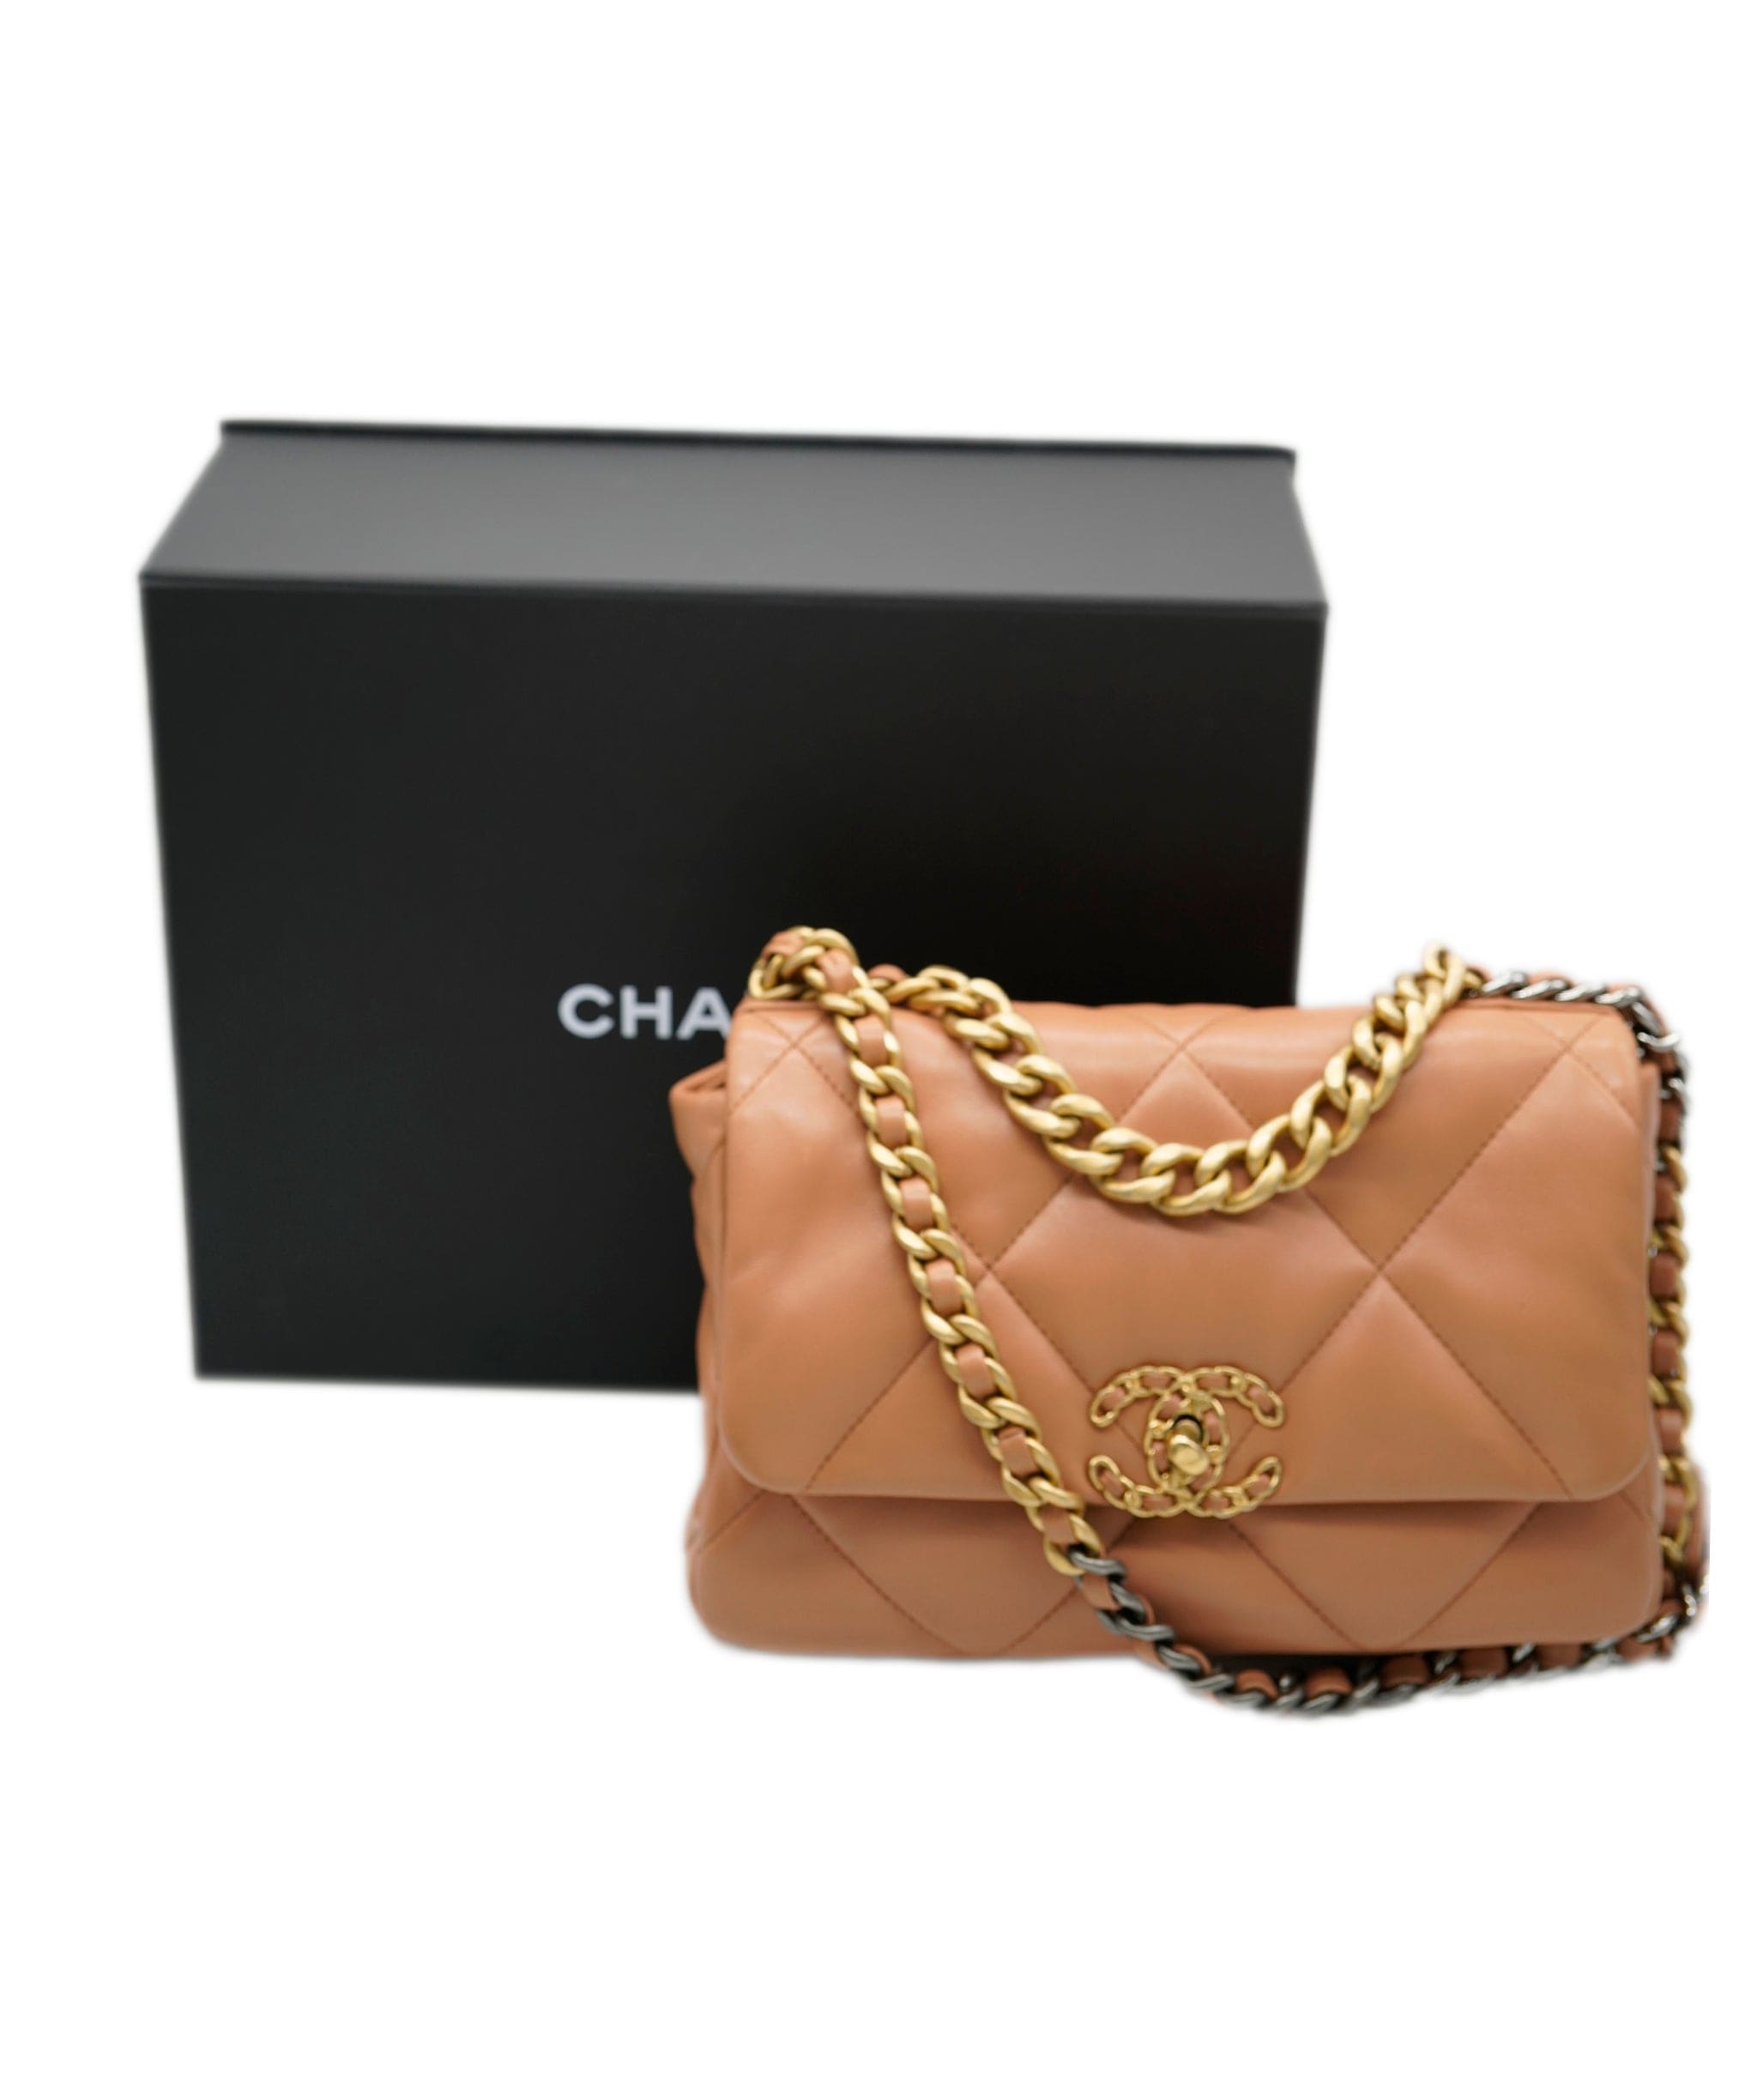 Chanel Chanel 19 small in caramel brown AGL2415